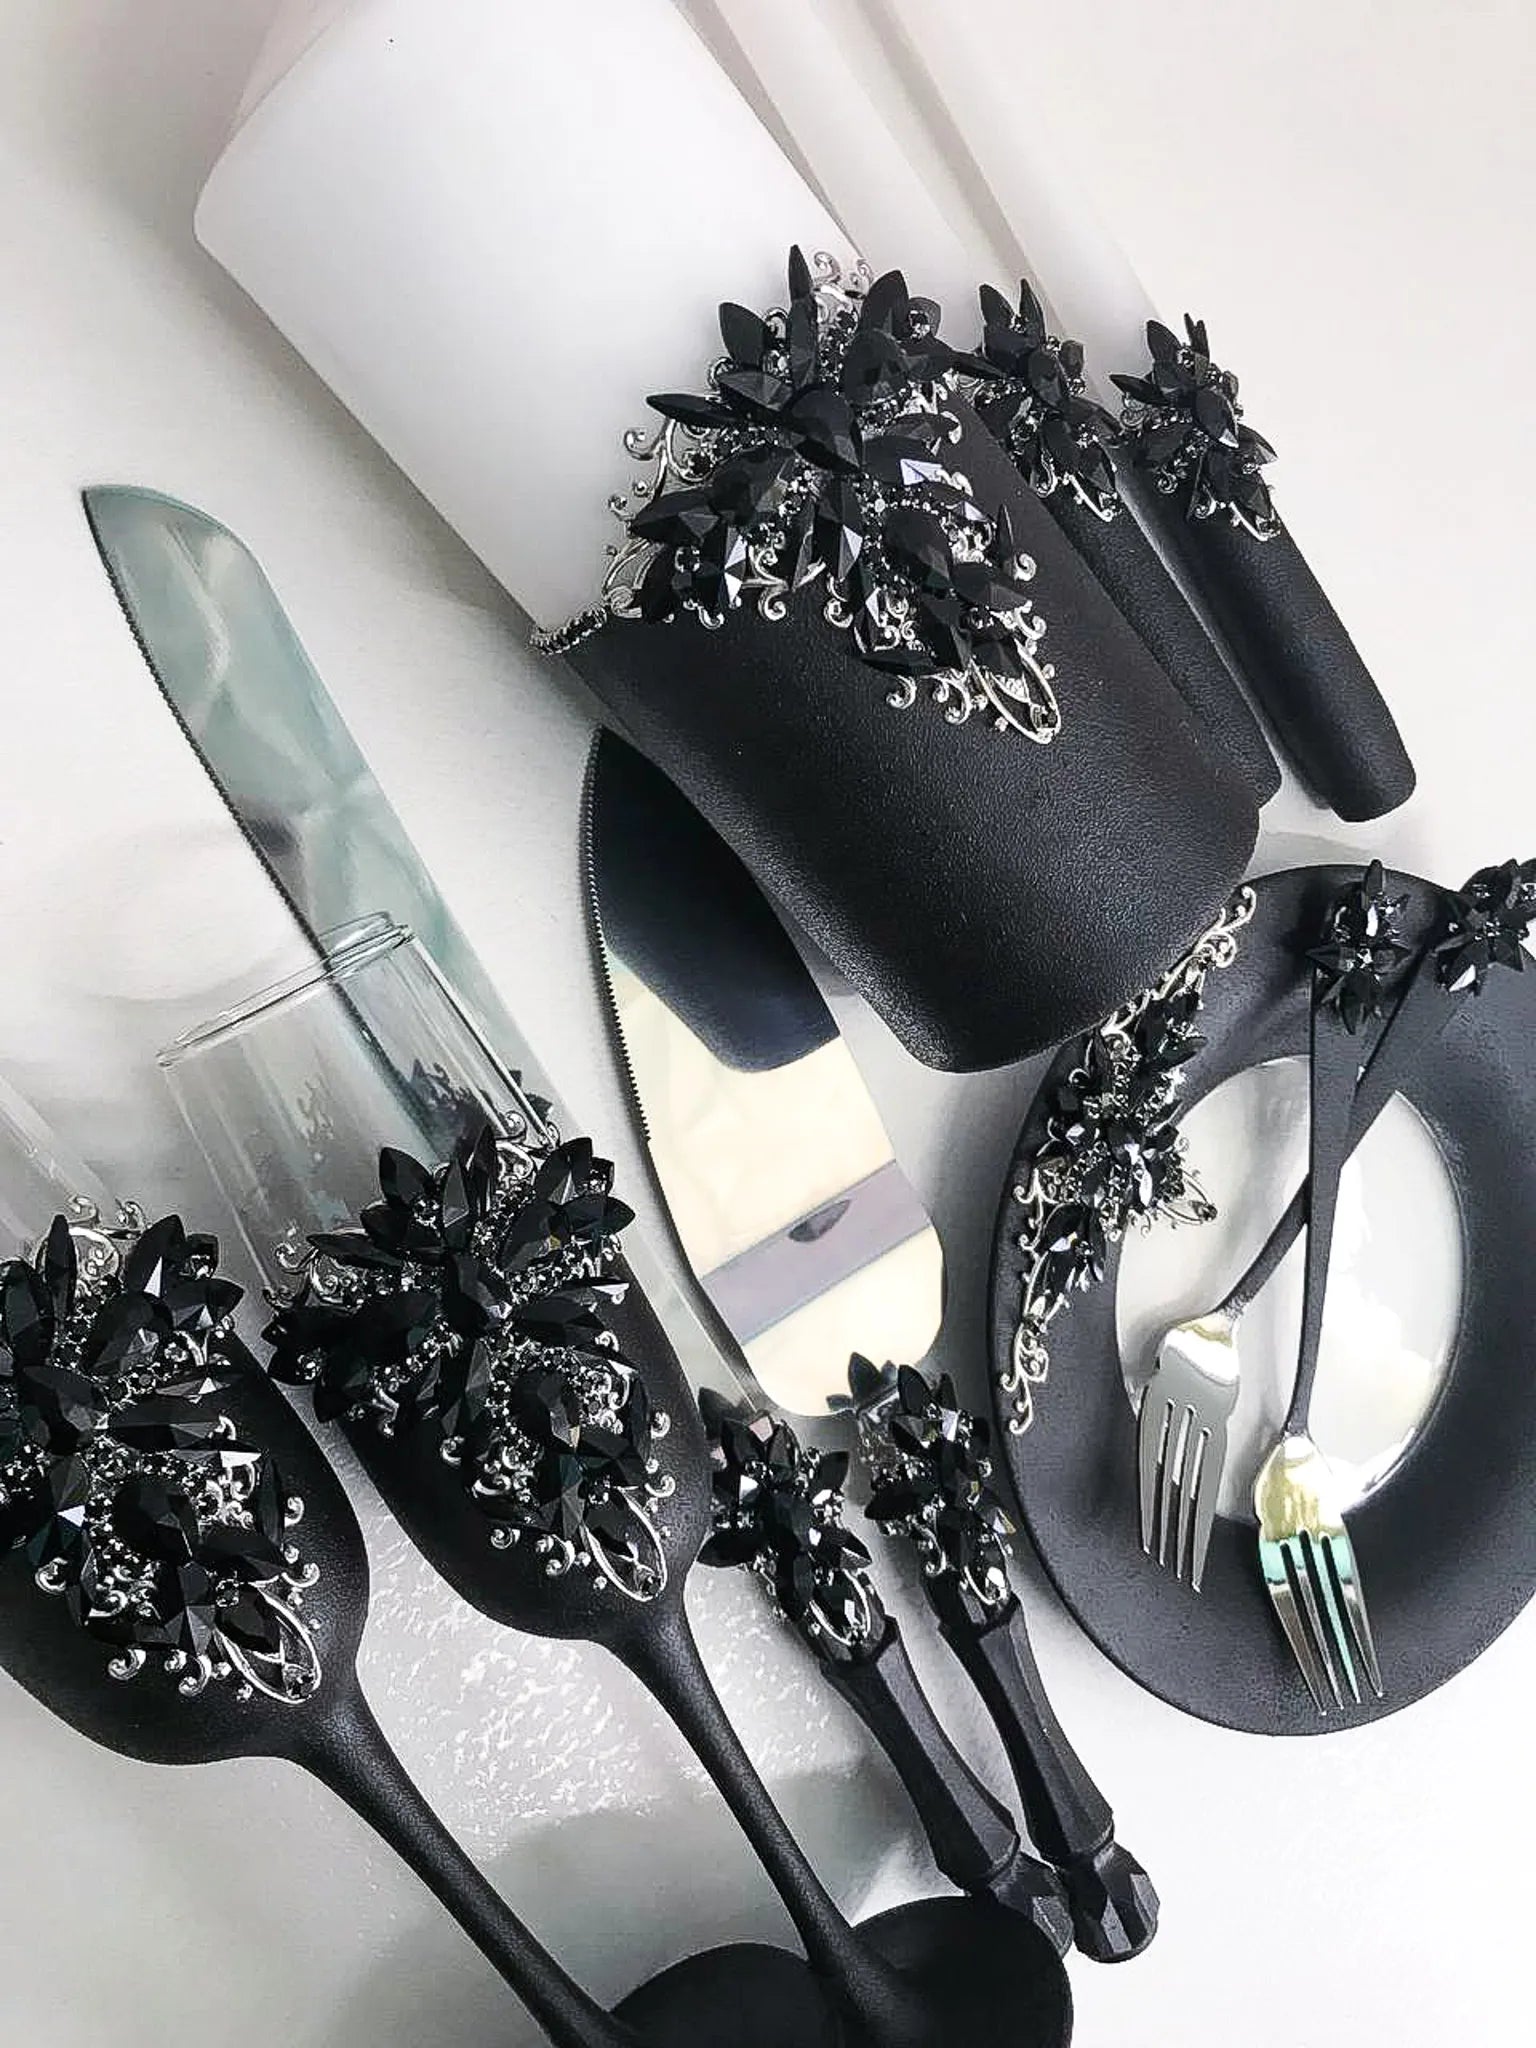 Personalized gothic black and silver cake utensils